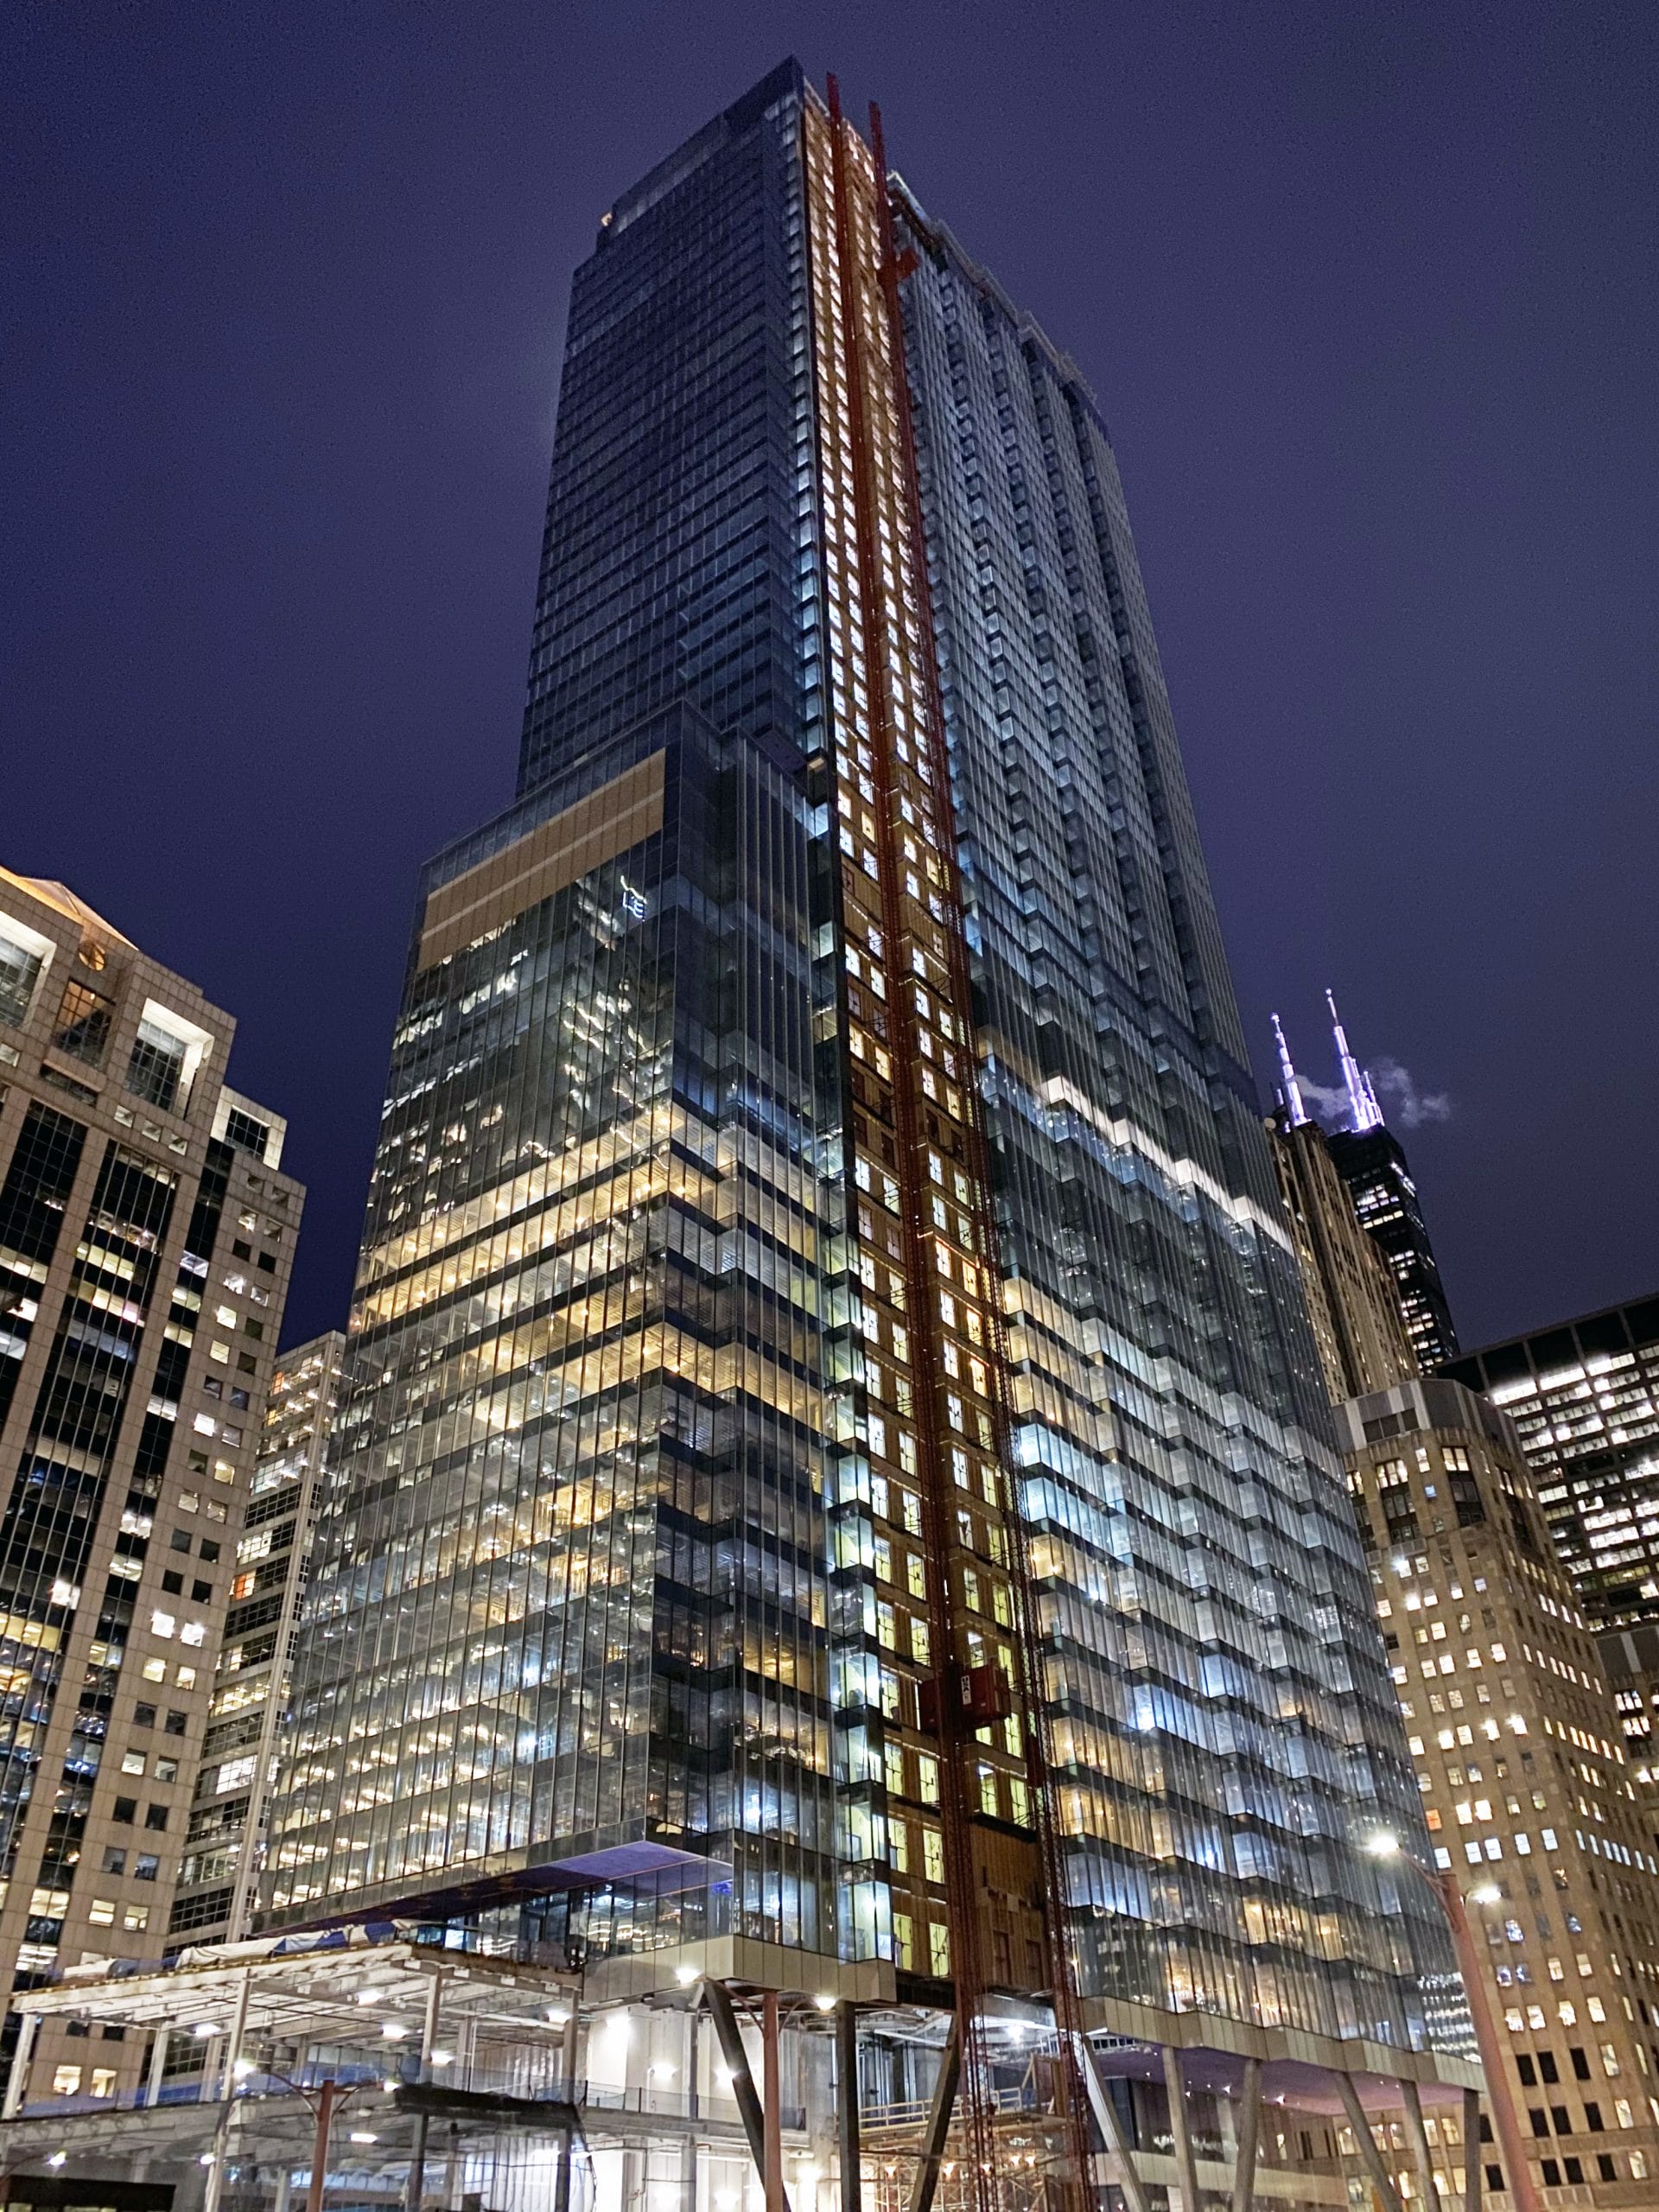 Skender Launches Interior Construction of New 536,000-SF Bank of America Flagship Office